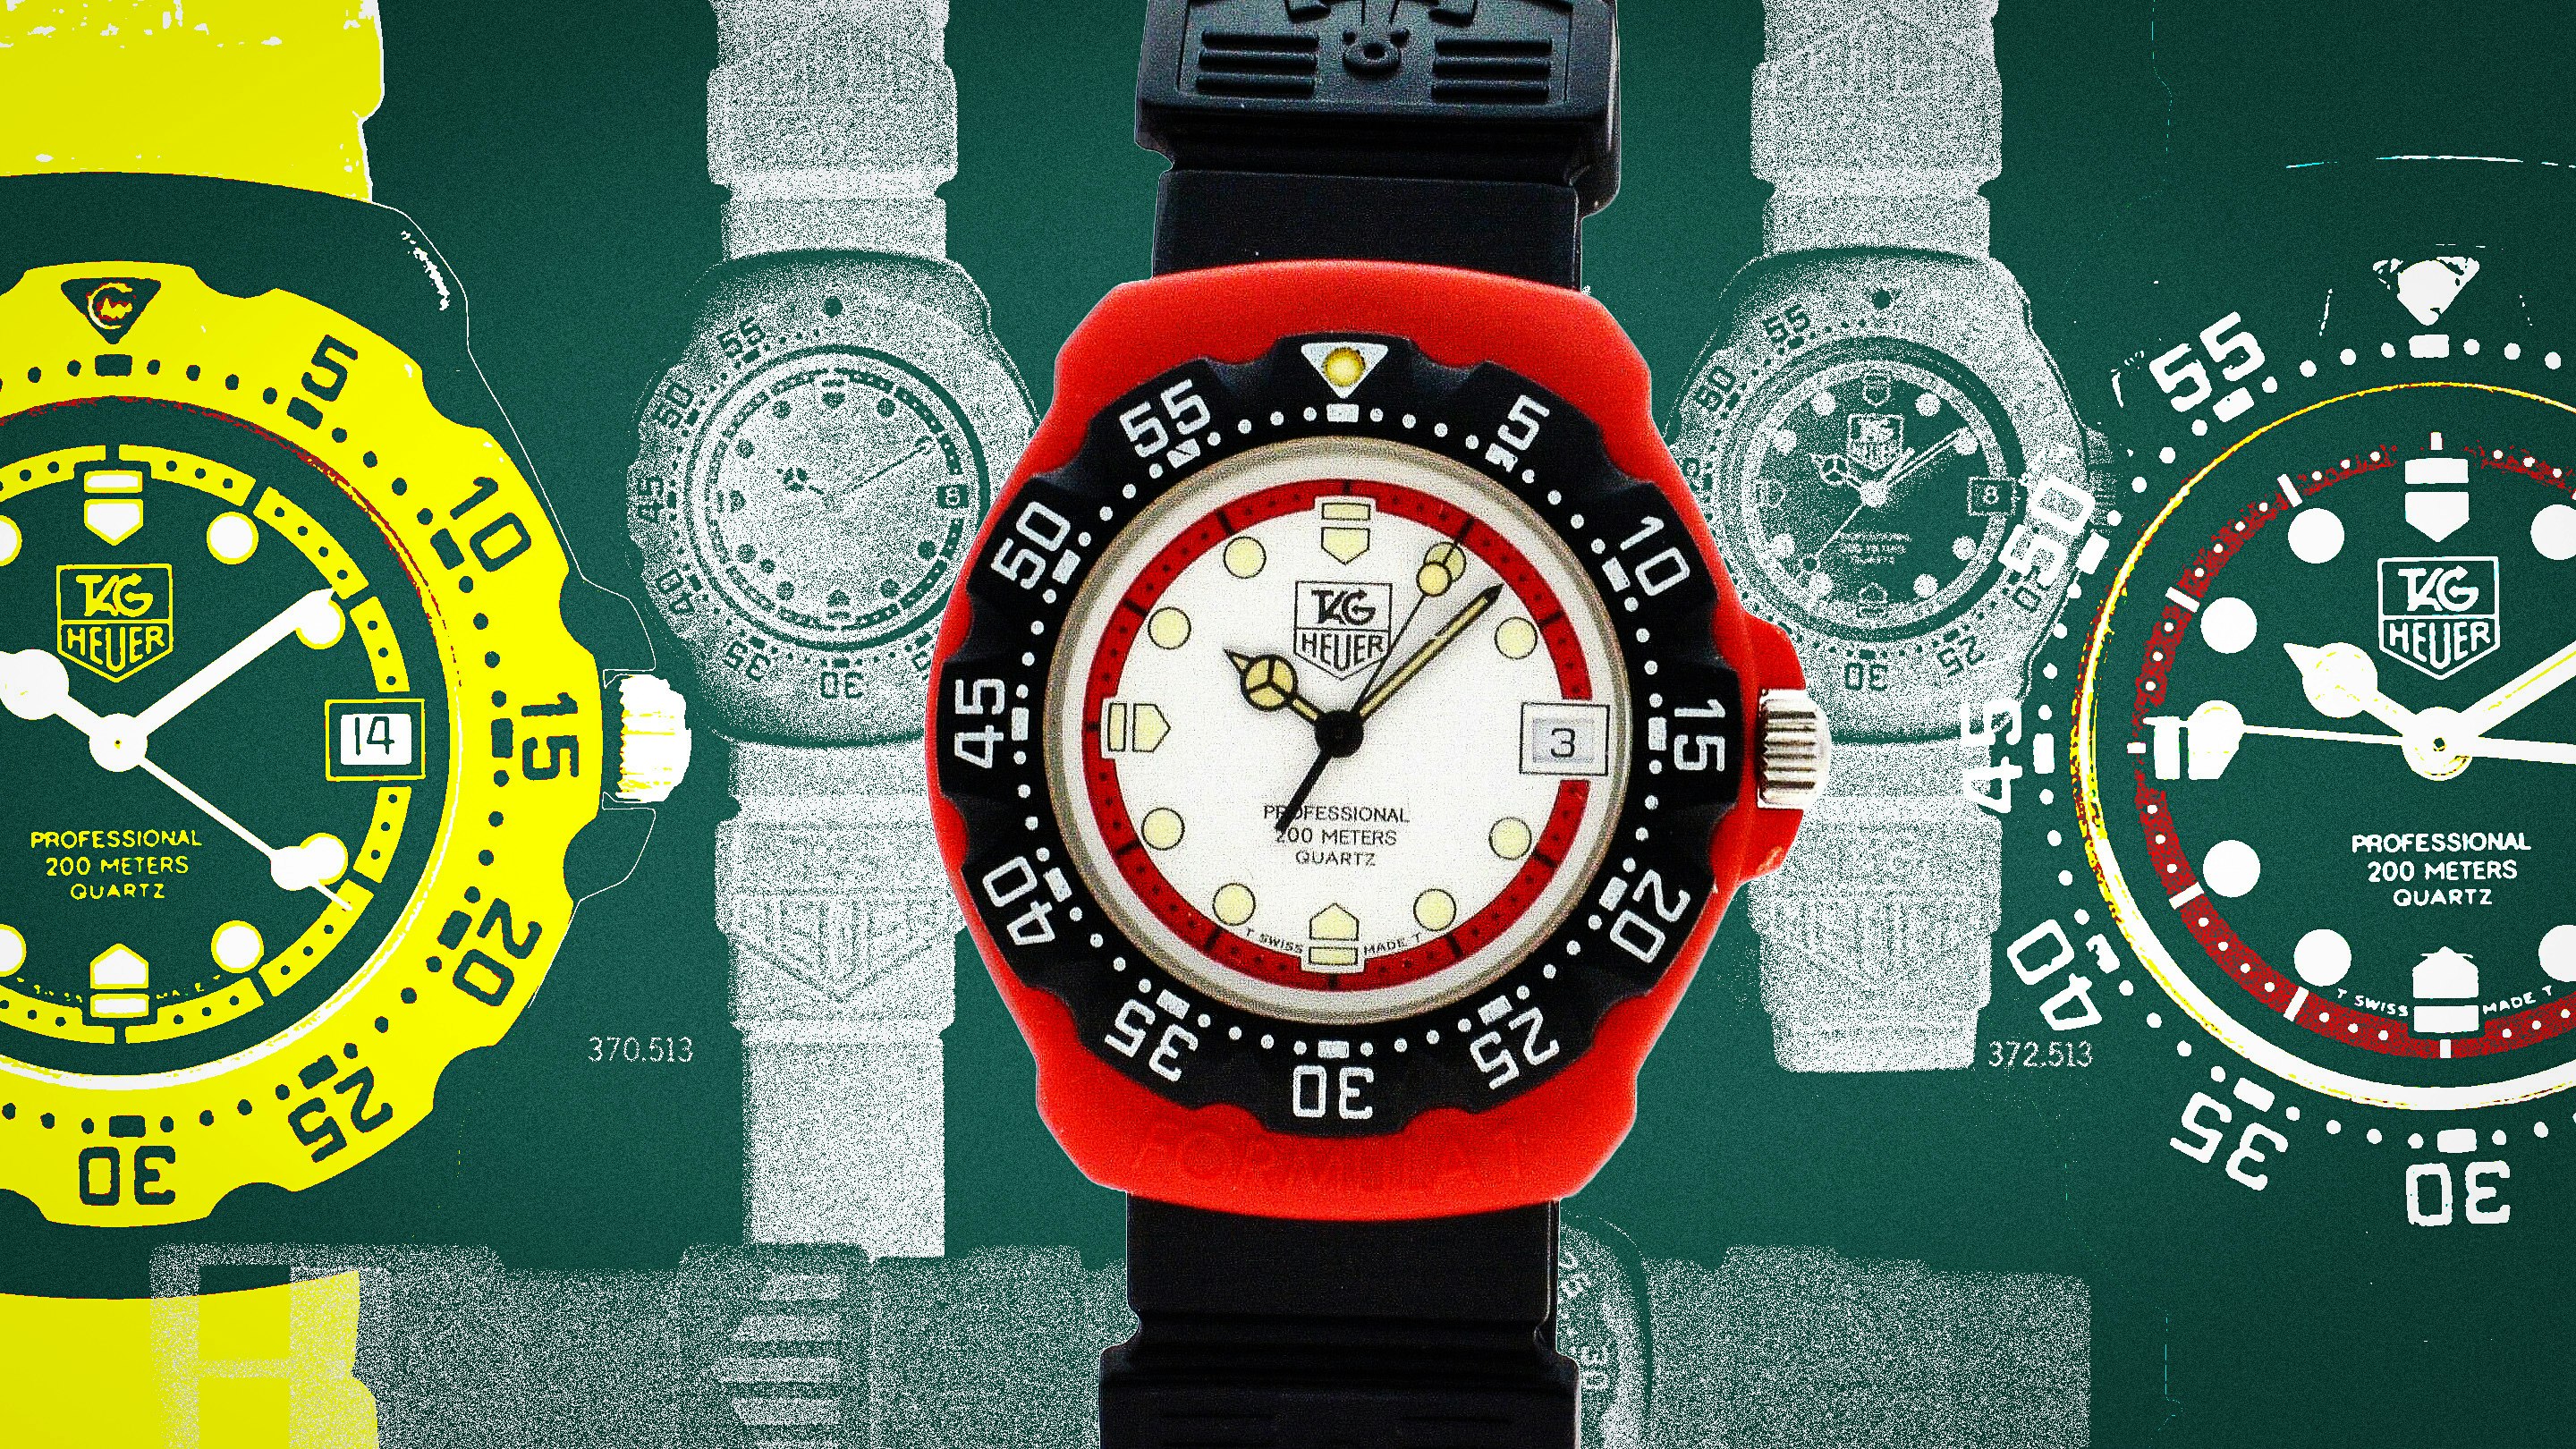 Its Time For TAG Heuer To Bring Back The Original Formula One Watch